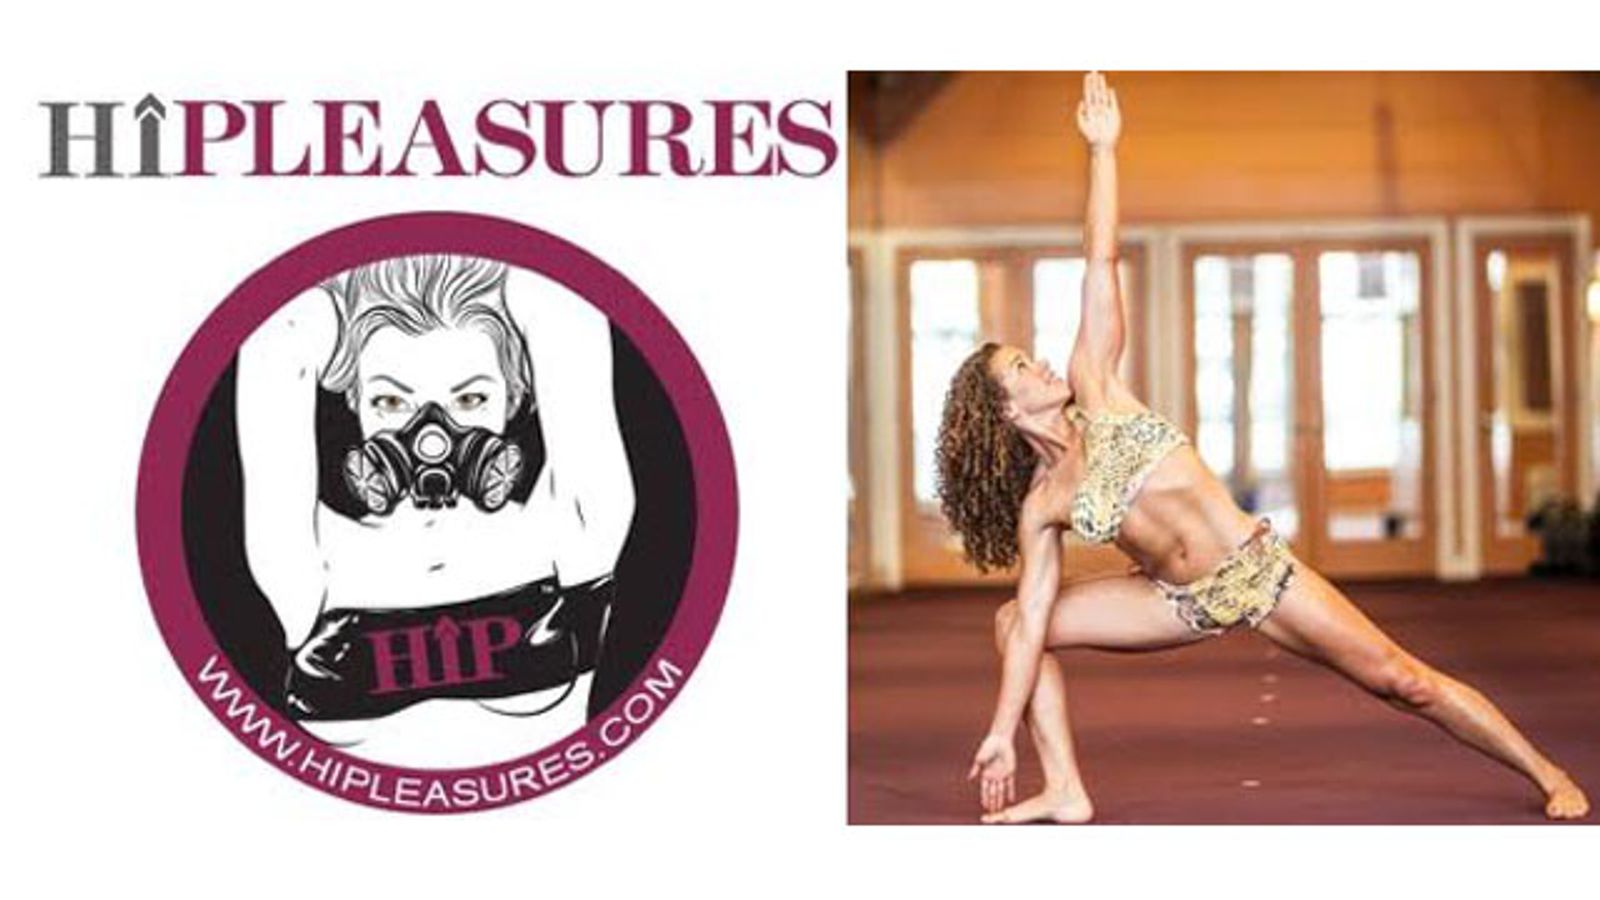 Exclusive Soul On Fire Coaching Program Coming From HiPleasures